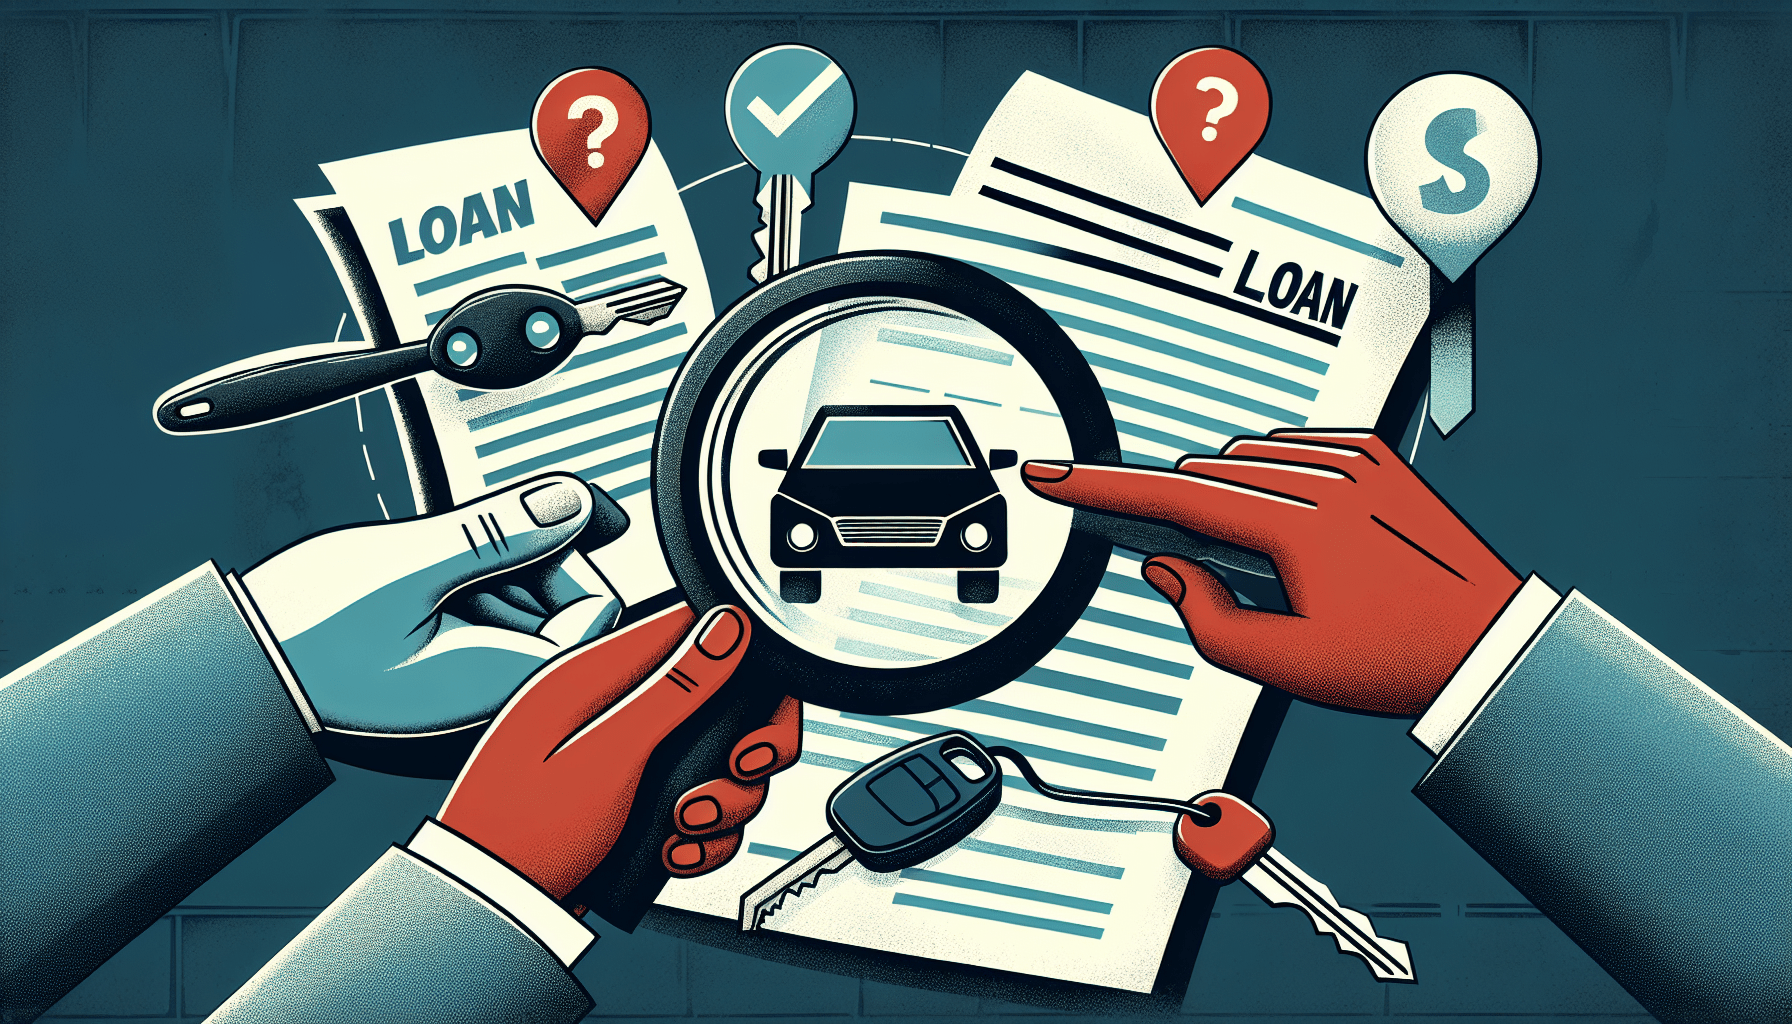 What Are My Rights As A Borrower With An Auto Loan? (understanding Loan Terms And Avoiding Scams)